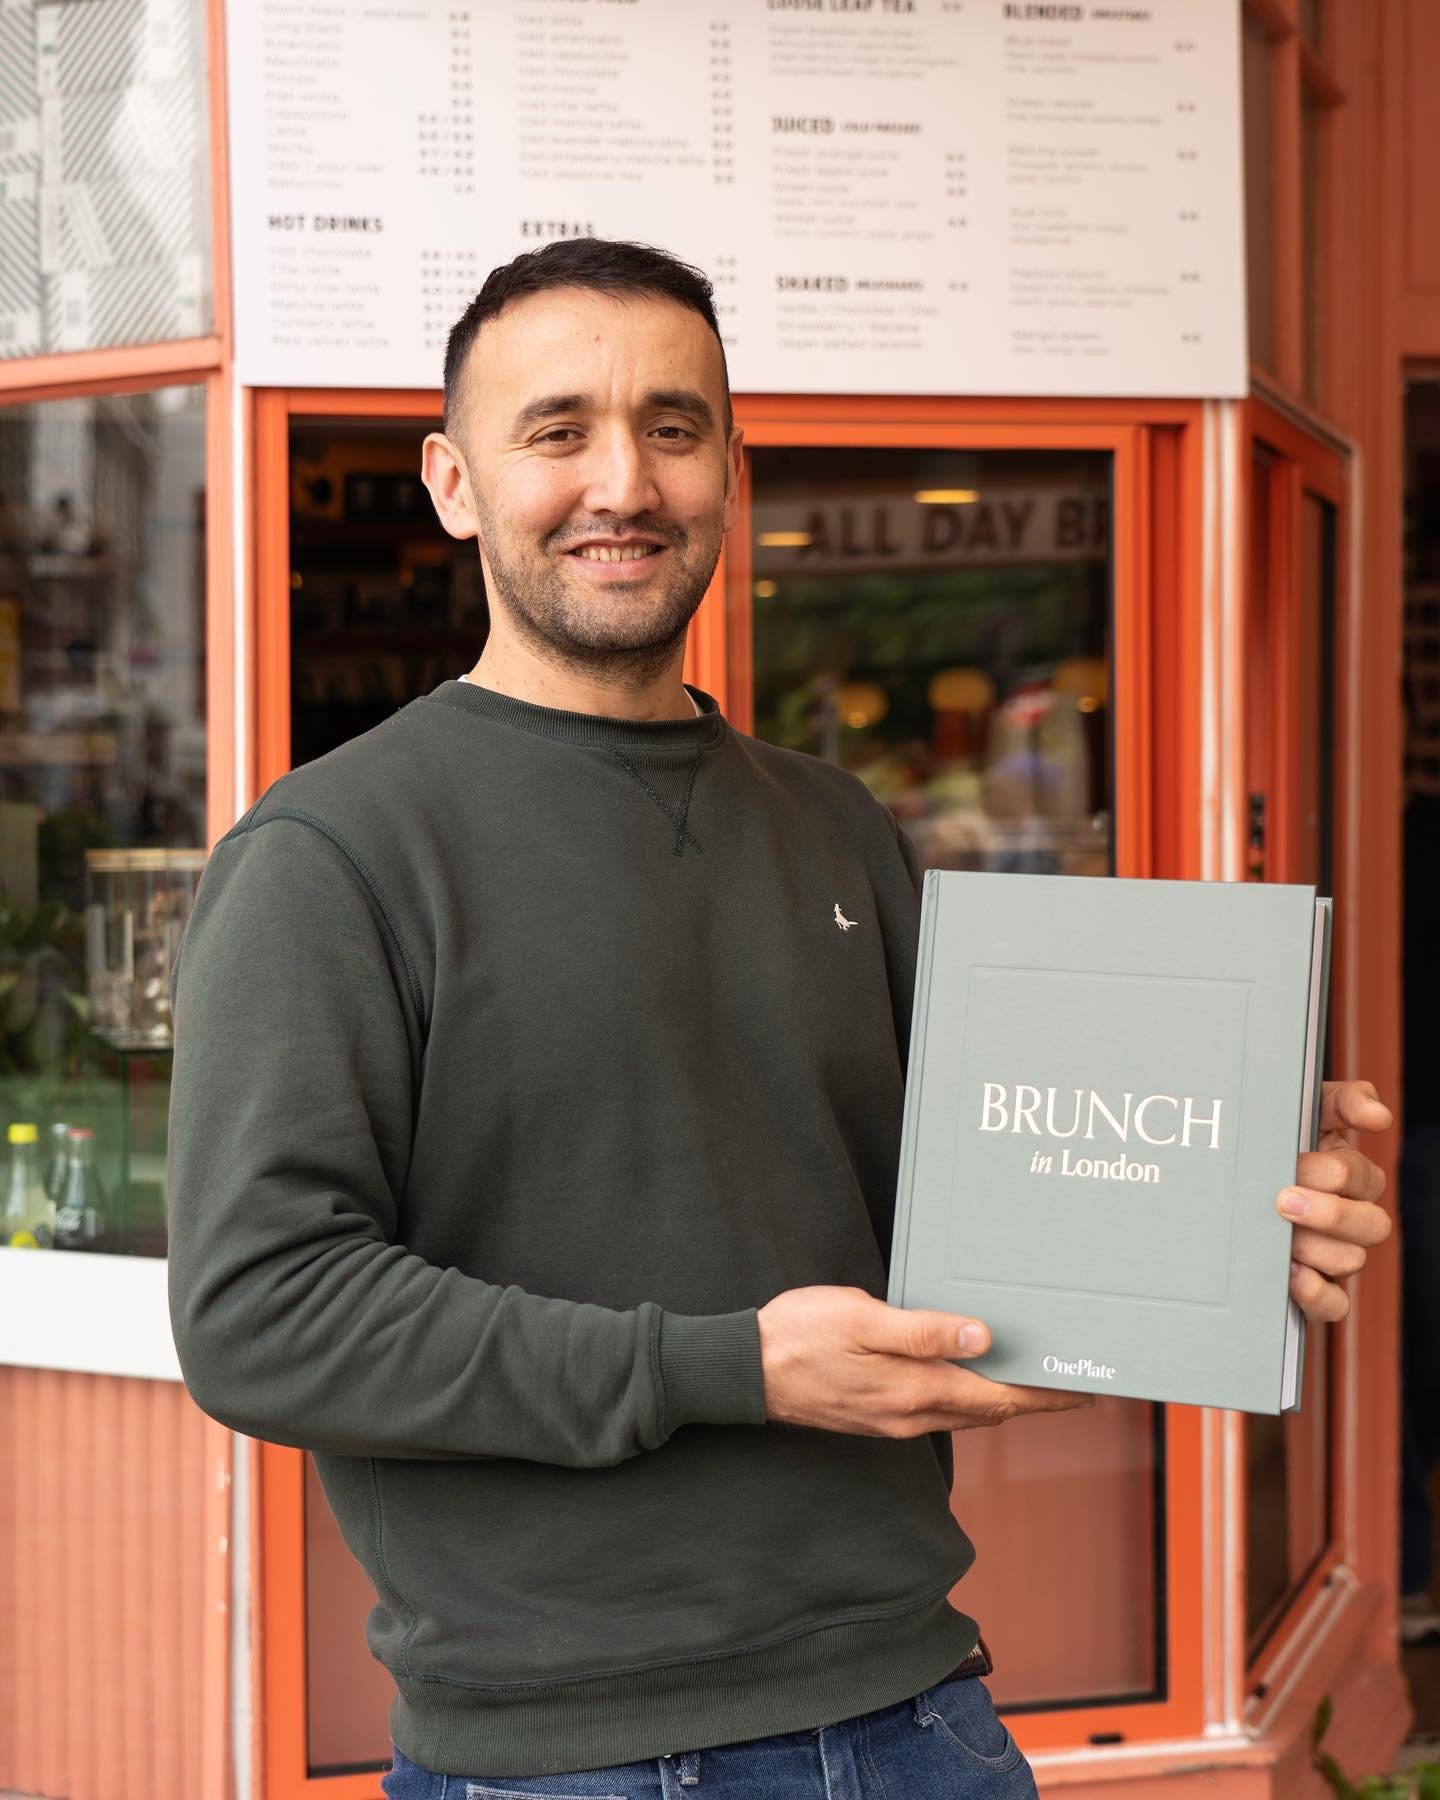 We&rsquo;re proud to be part of &lsquo;Brunch in London&rsquo;, featuring over 100 recipes from the city&rsquo;s beloved spots including ours! Get inspired, whip up some Silk Road eggs help support food projects for children. 📚🍳

Grab your copy. We